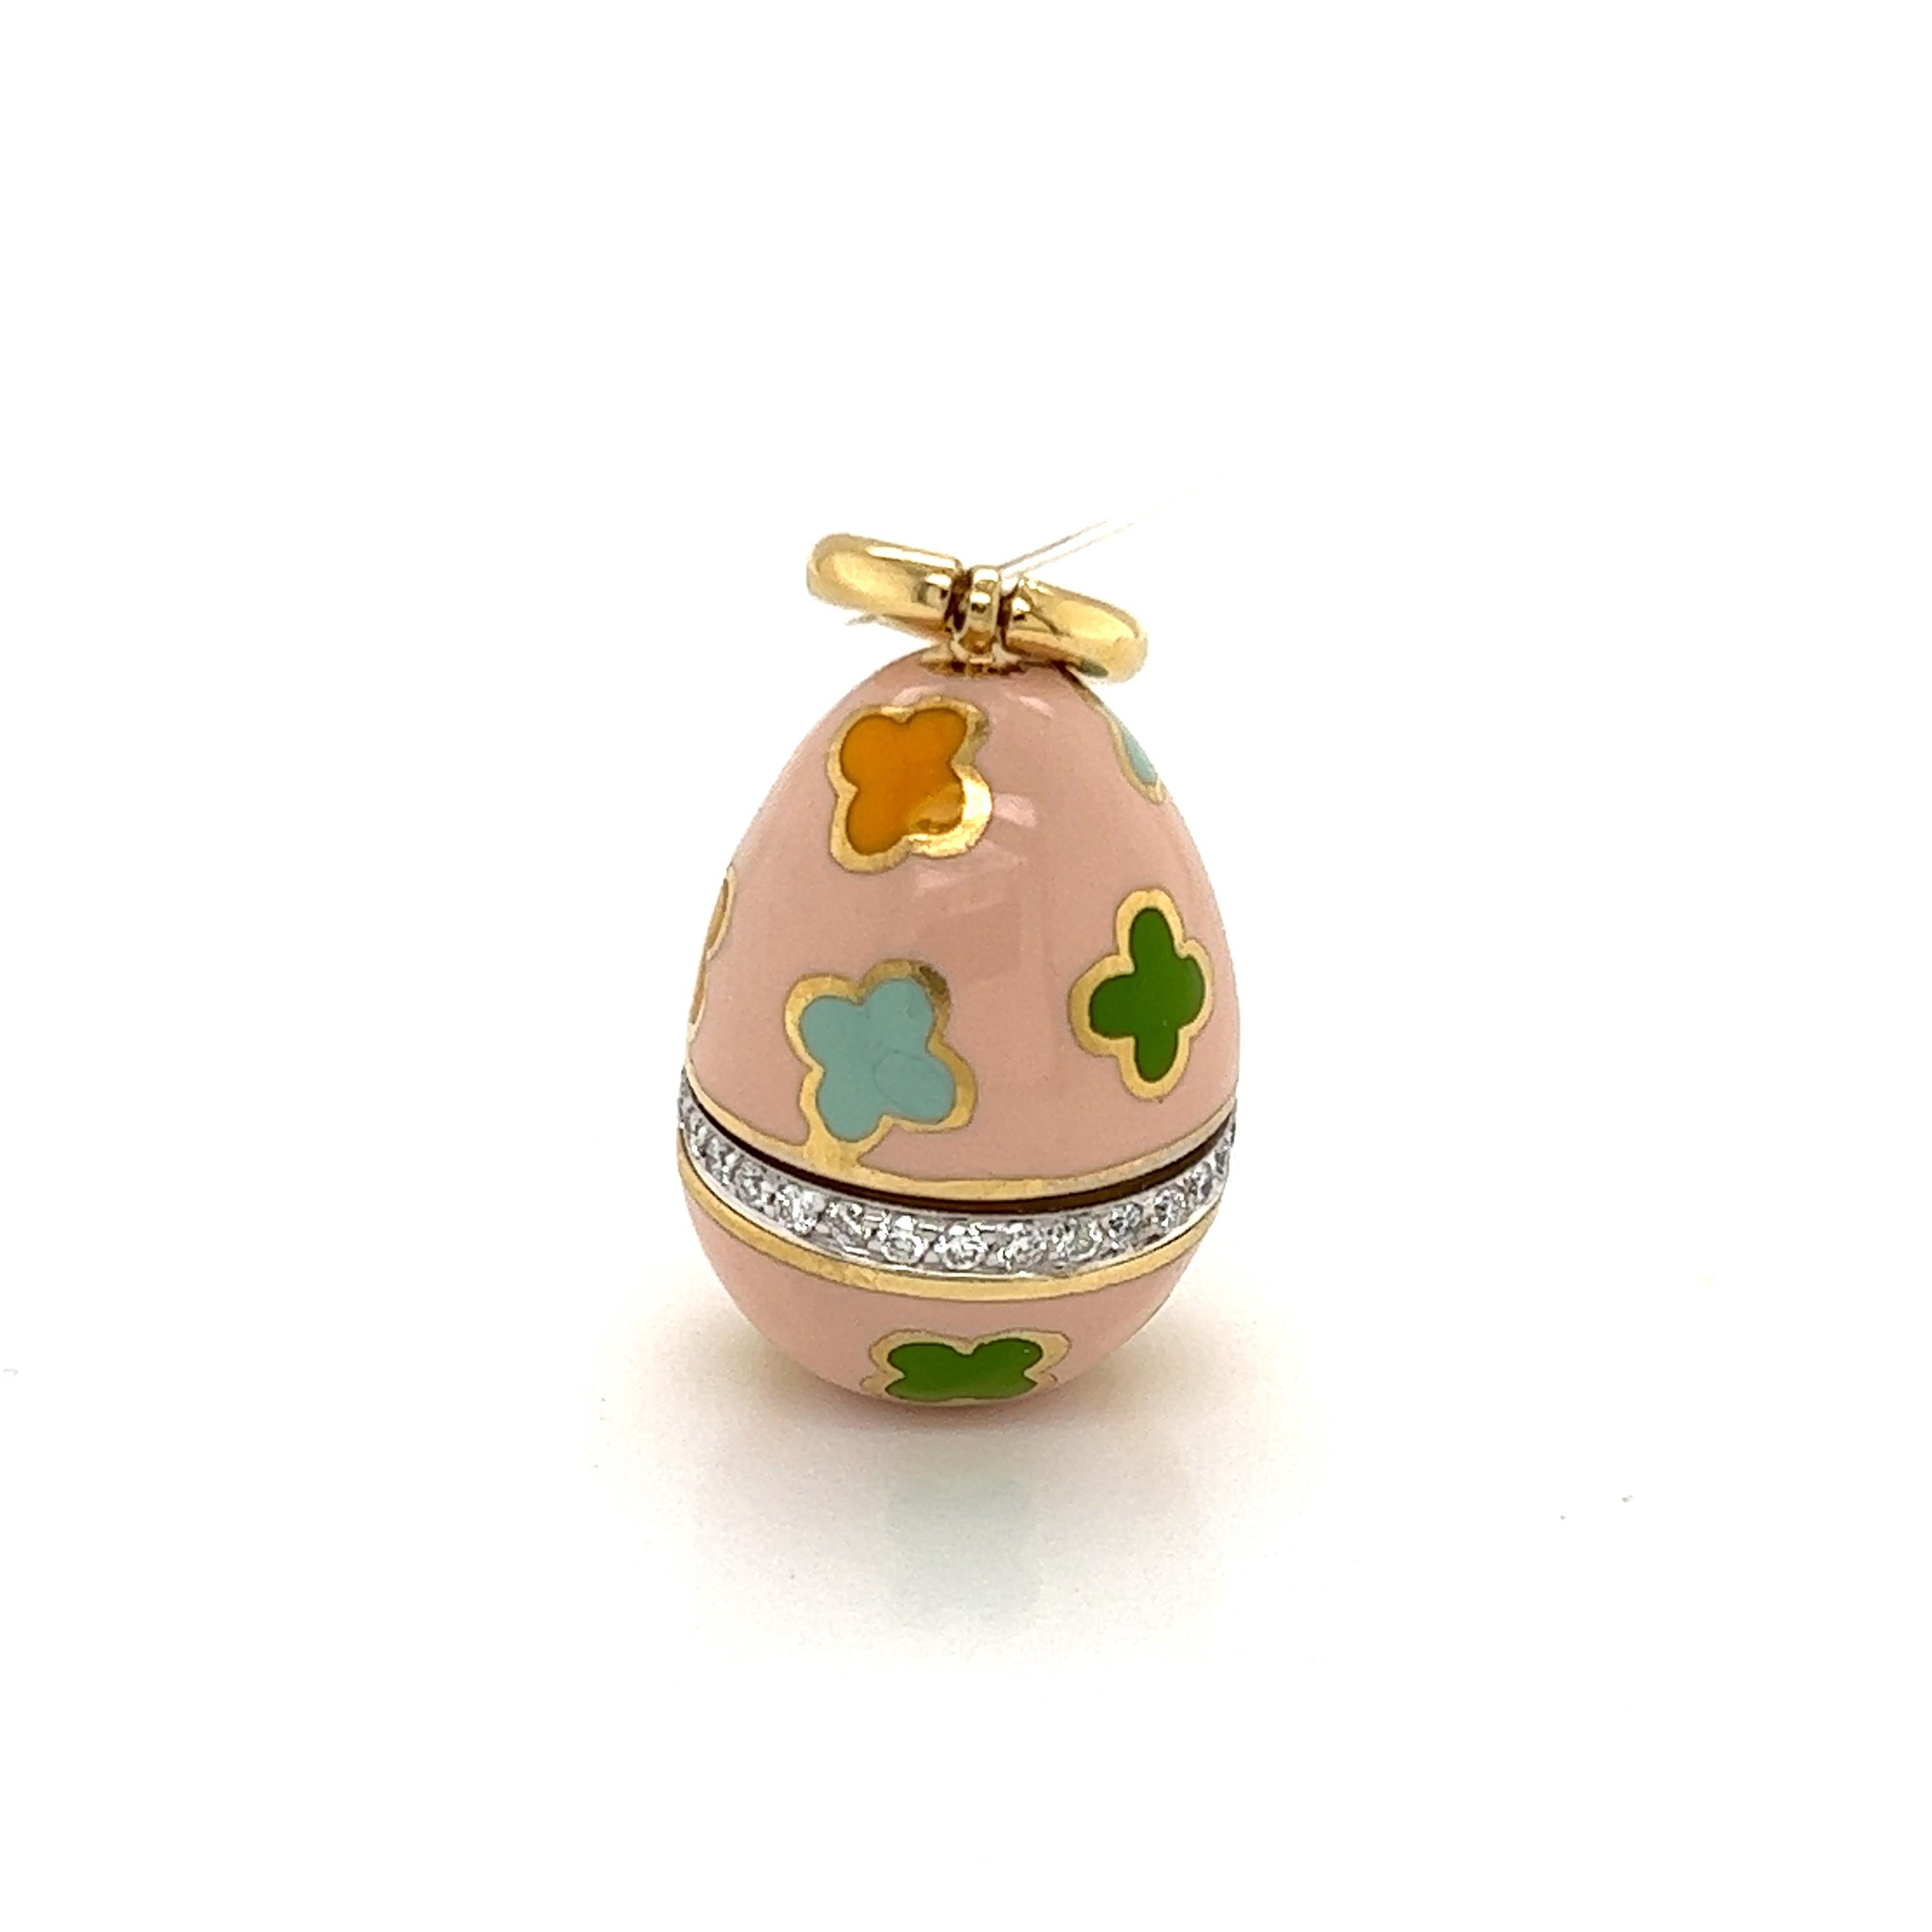 This cute authentic pendant is by Aaron Basha, crafted from 18k yellow gold featuring an egg shape pendant with pink enamel surface and decorated with blue green and yellow enamel flowers. The lower end part of the egg has a circle decorated with